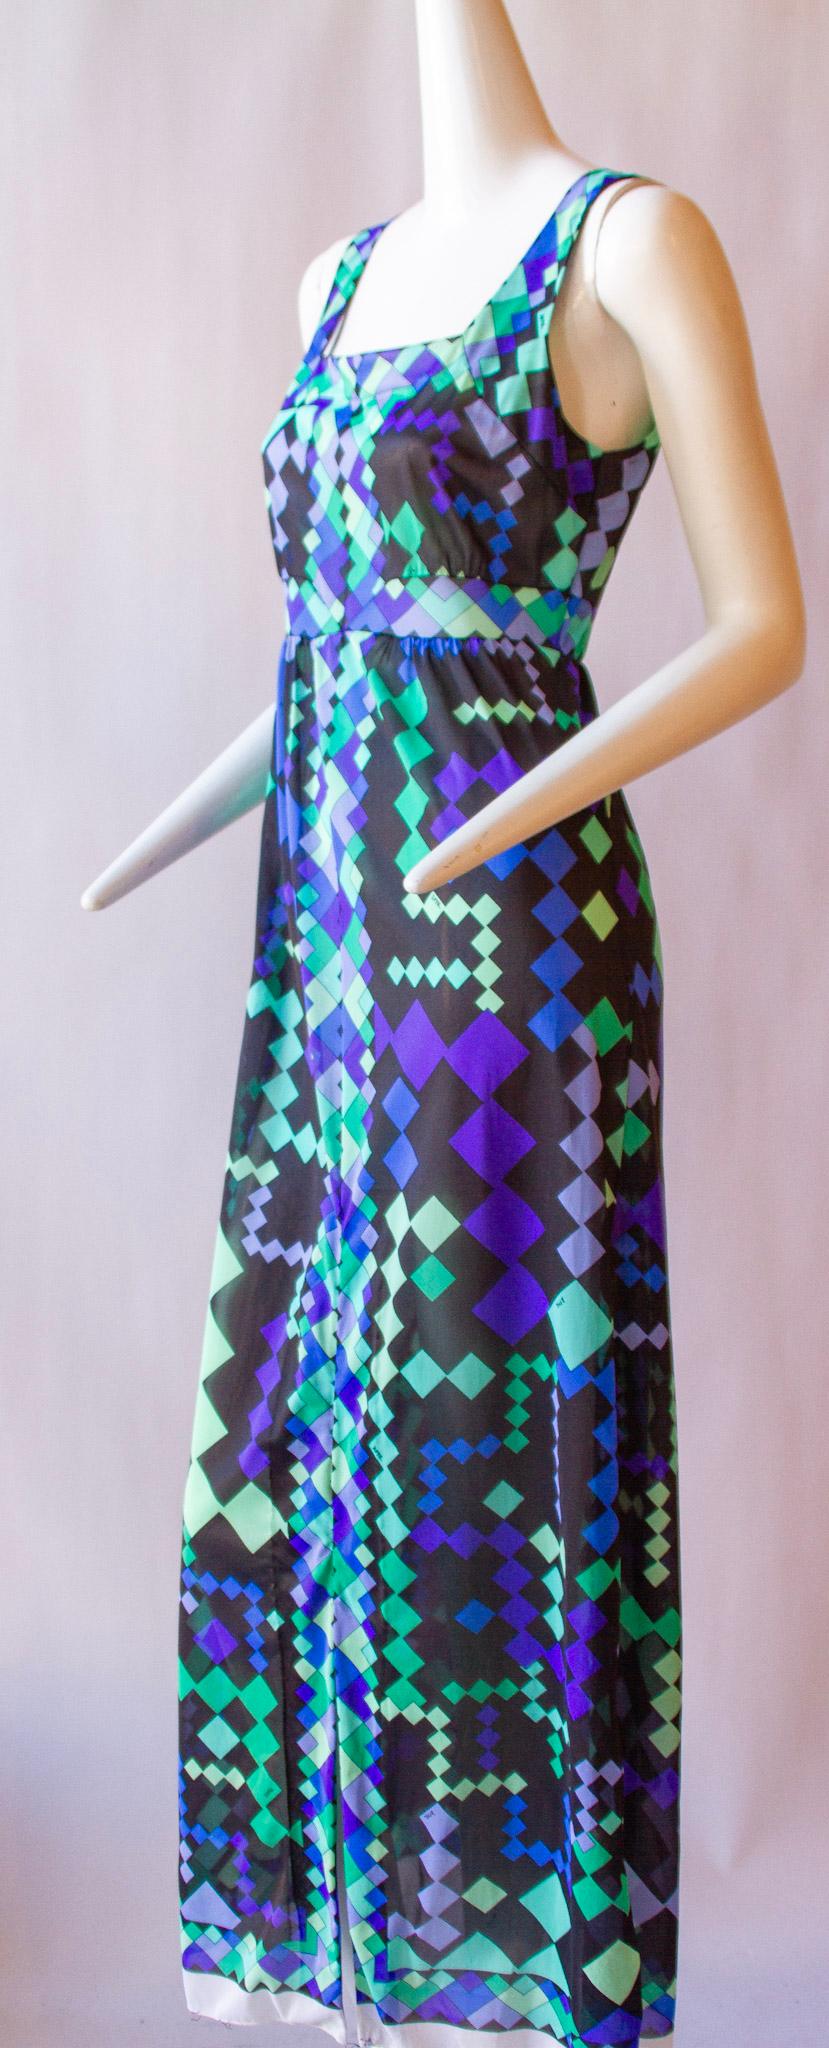 EMILIO PUCCI for Formfit Rogers Silk Ensemble circa 1959-1960 In Excellent Condition For Sale In Kingston, NY